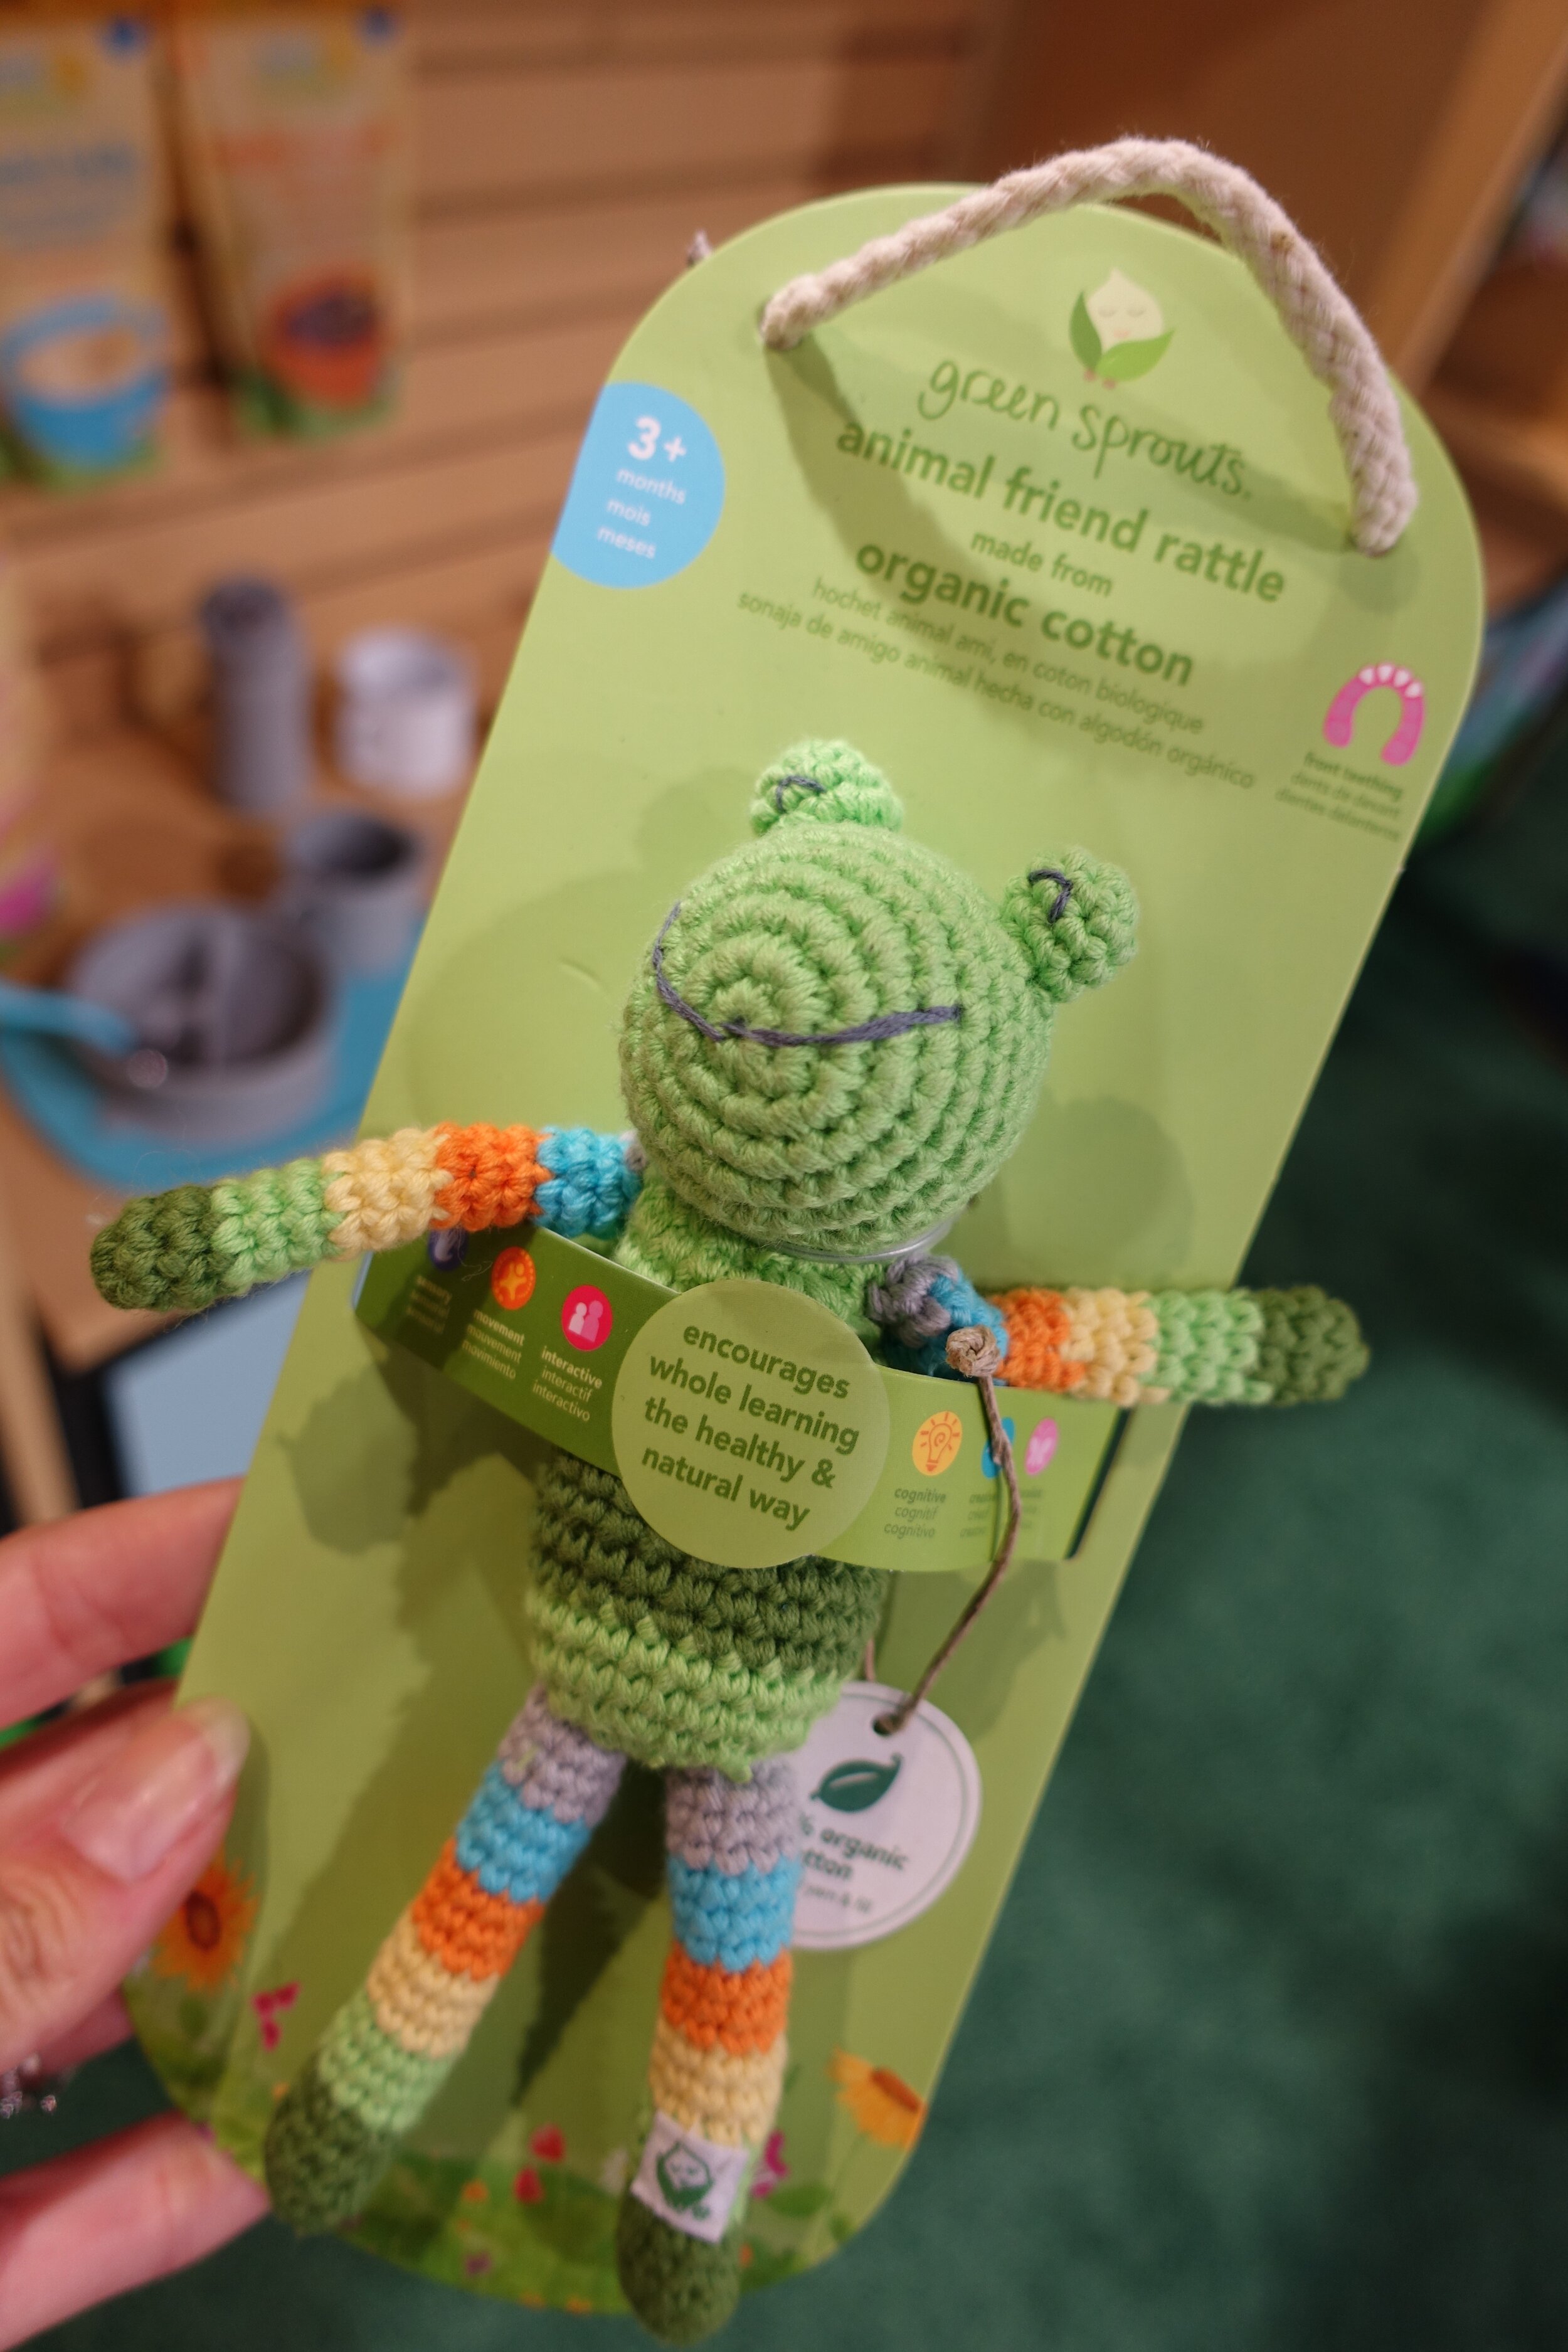 rockabye-mommy-abc-kids-expo-green-sprouts.jpg